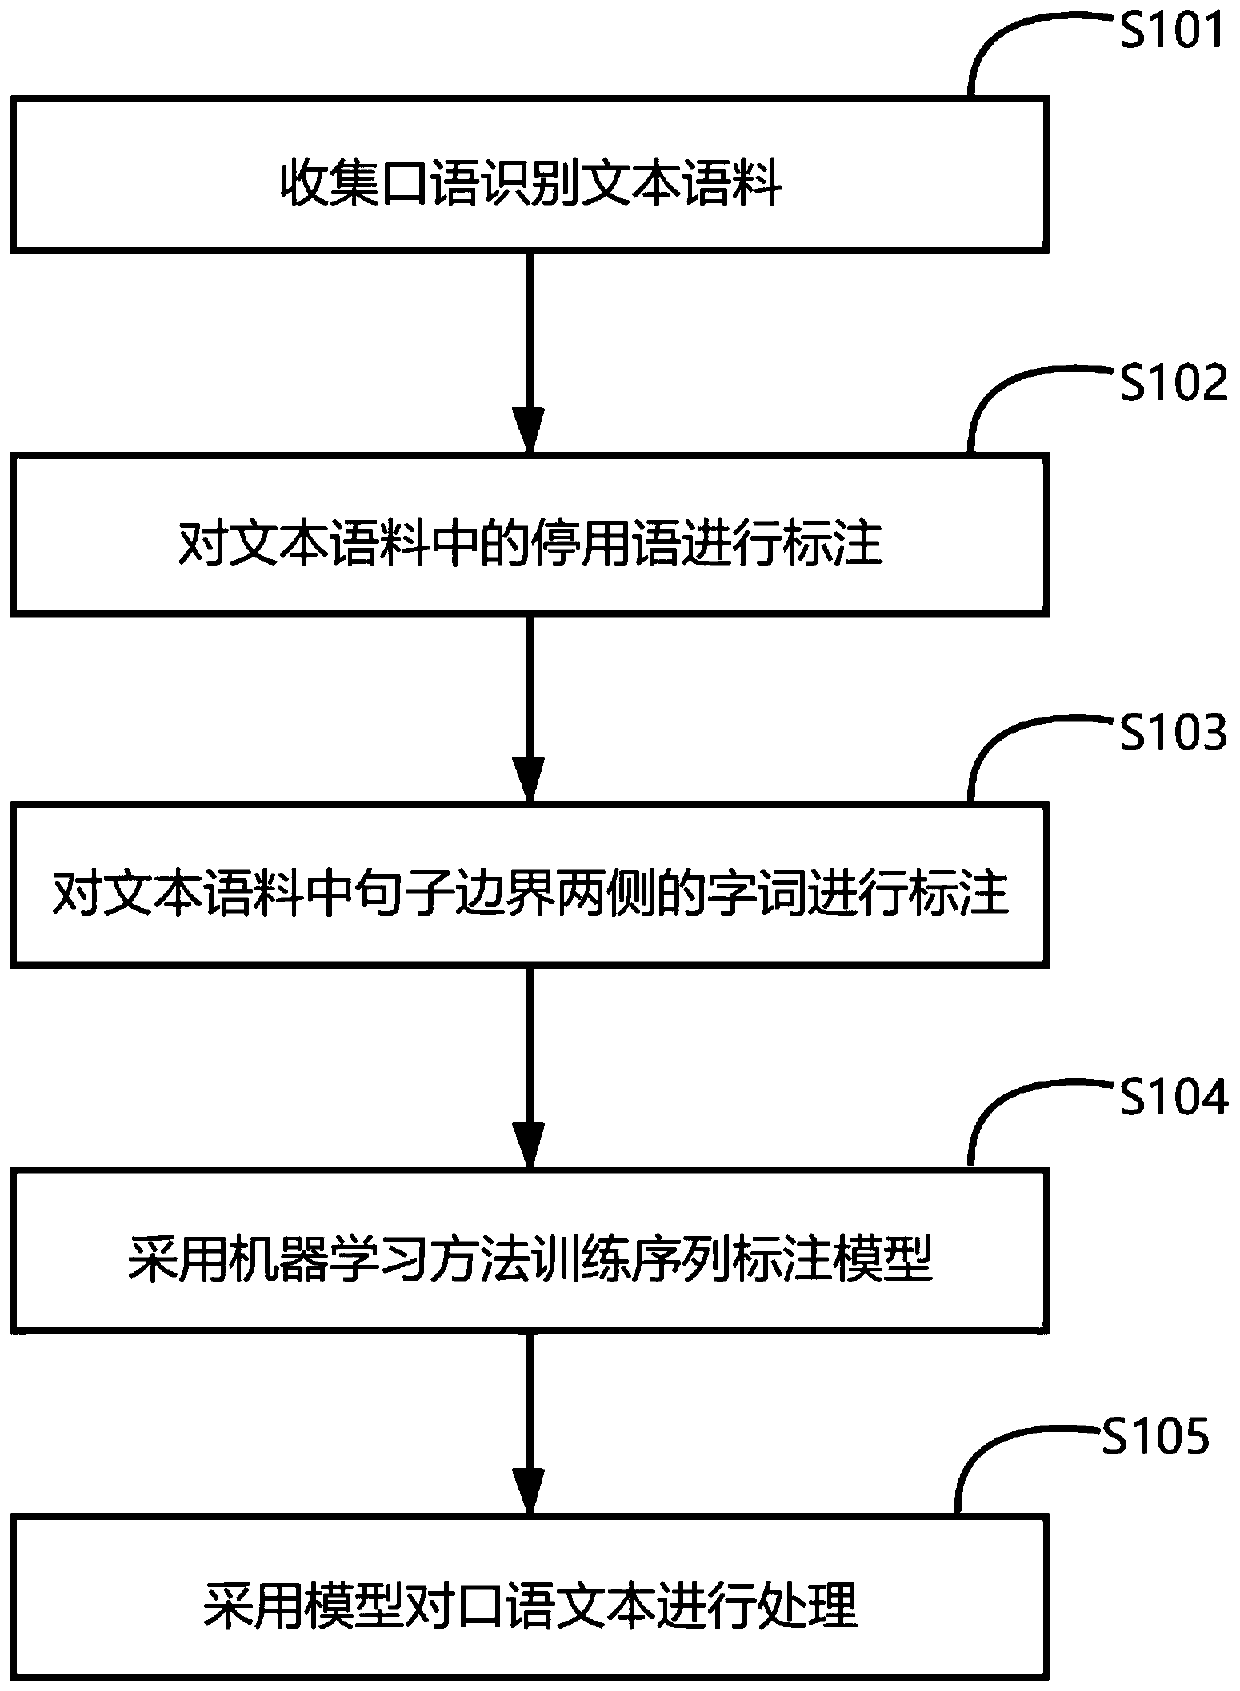 Spoken language text processing method for removing stop words and predicting sentence boundaries